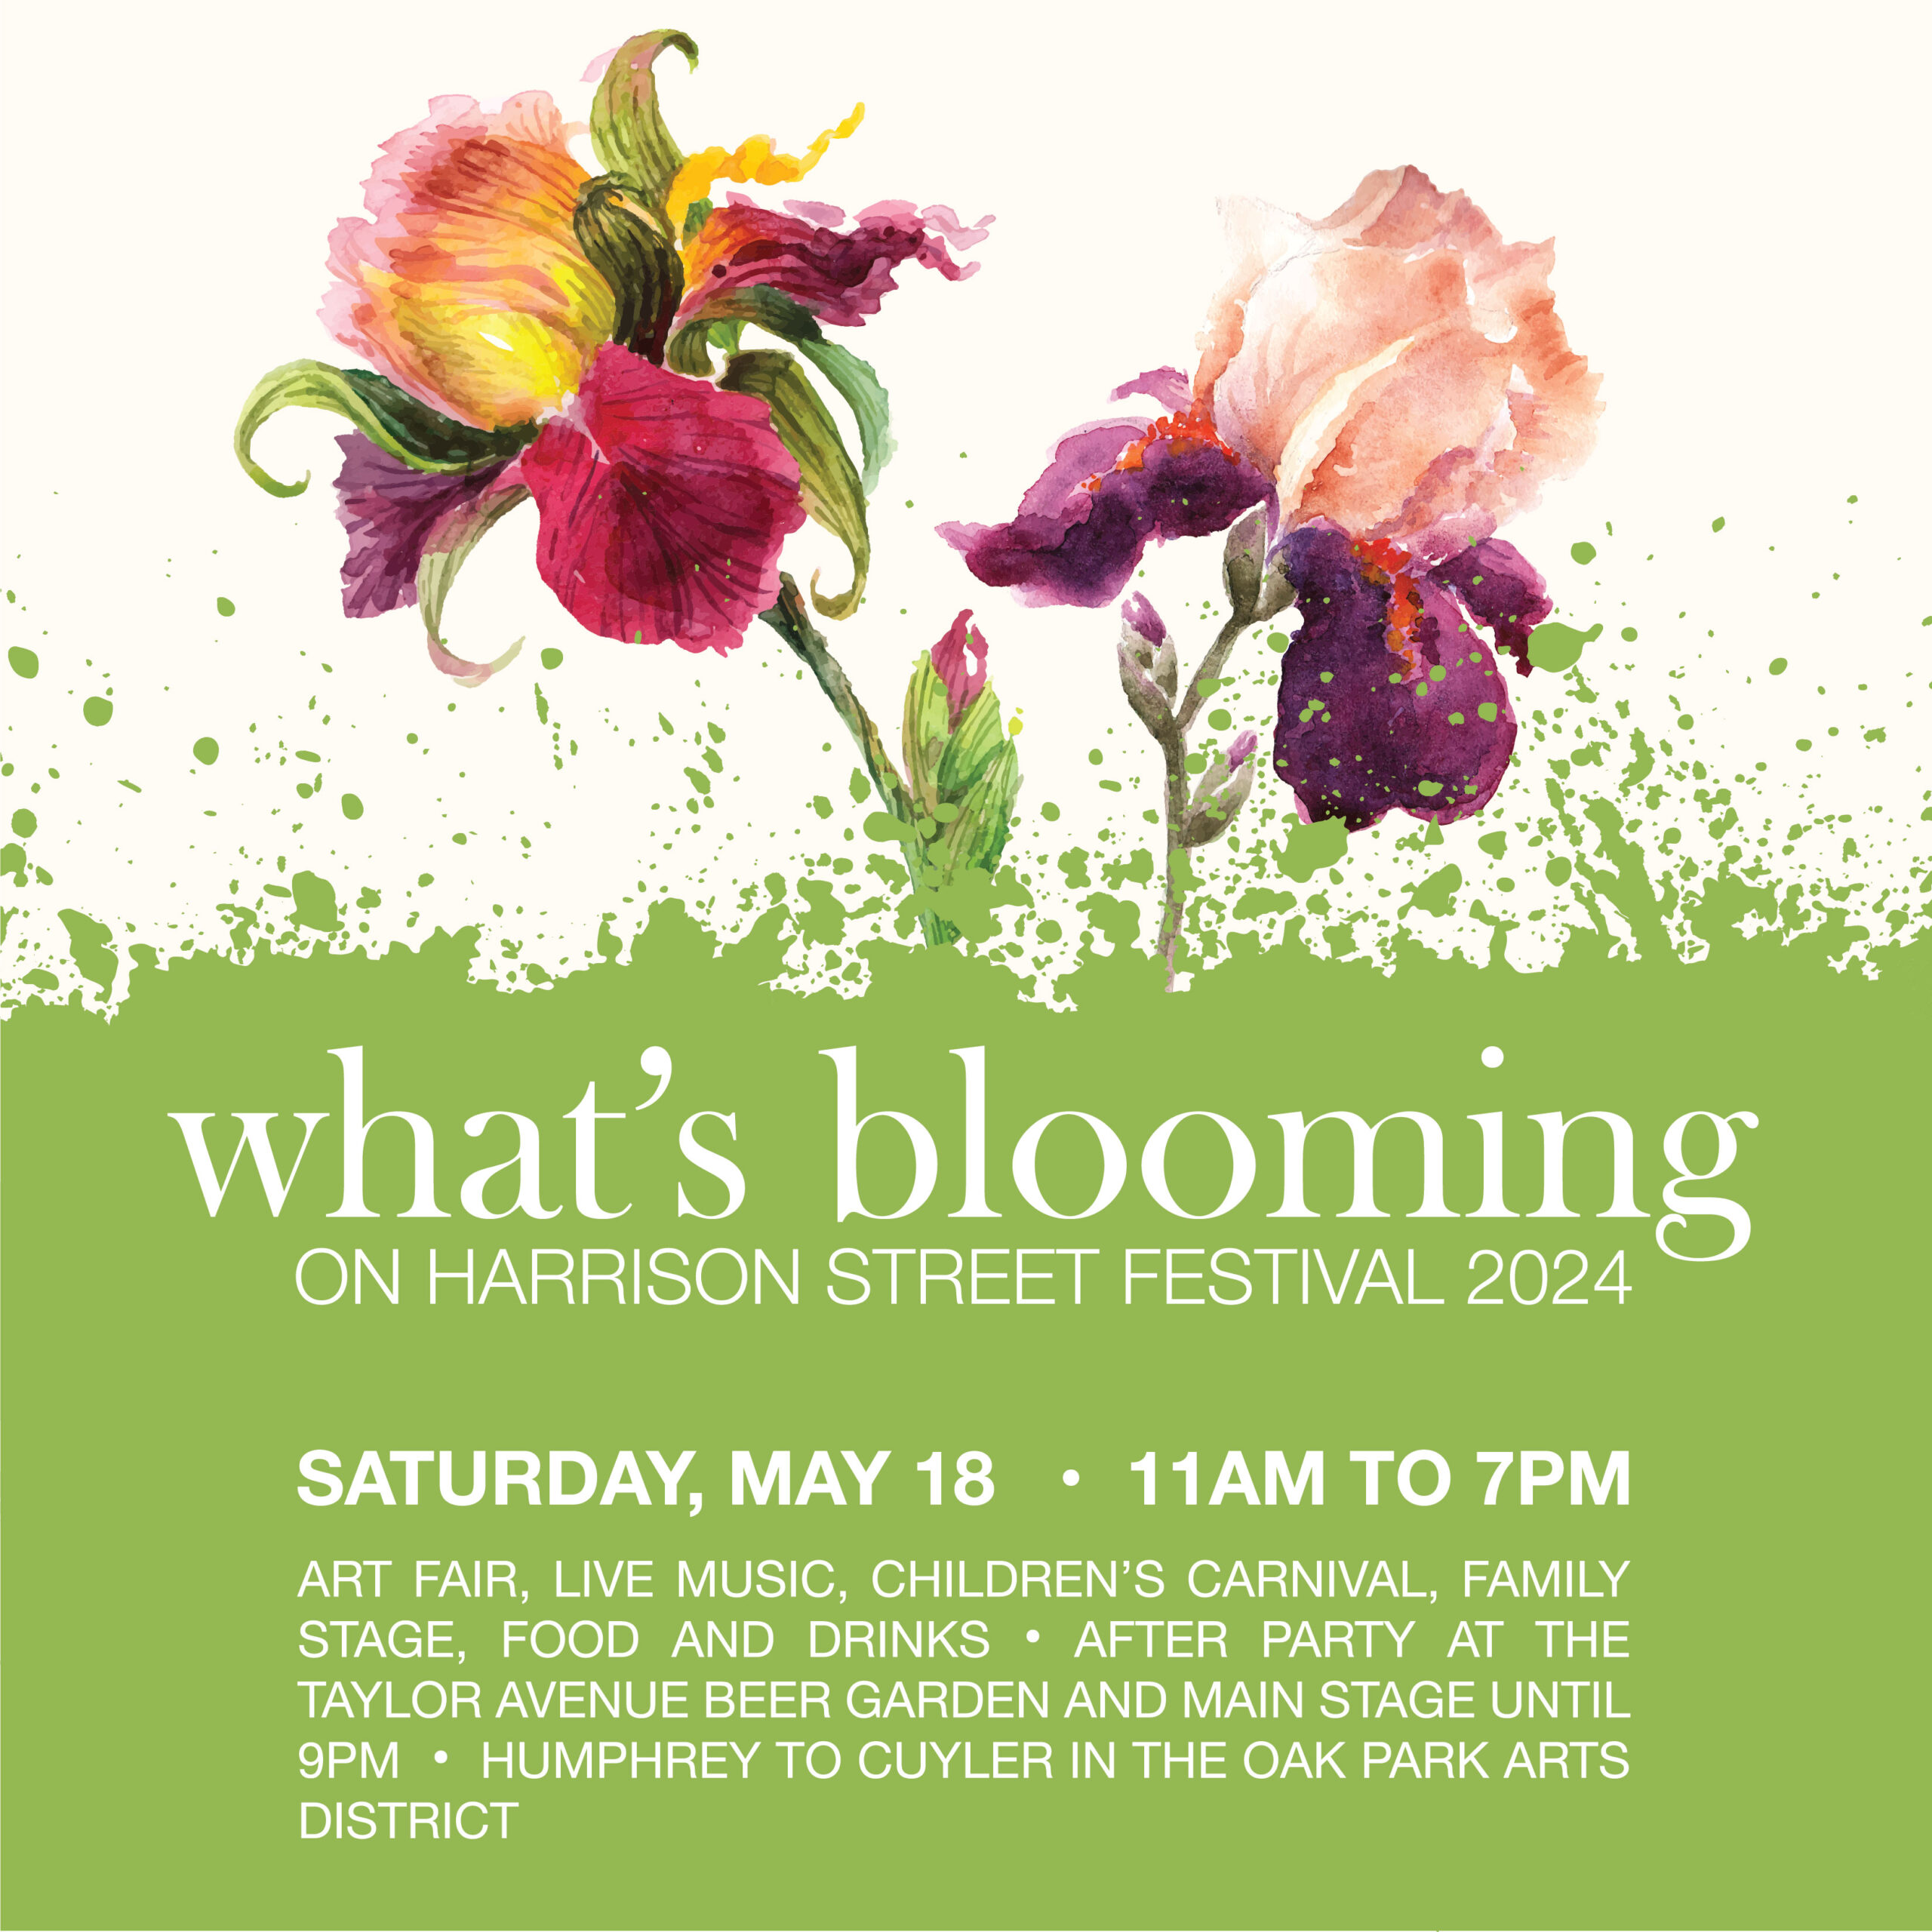 What's Blooming on Harrison Street Festival 2024